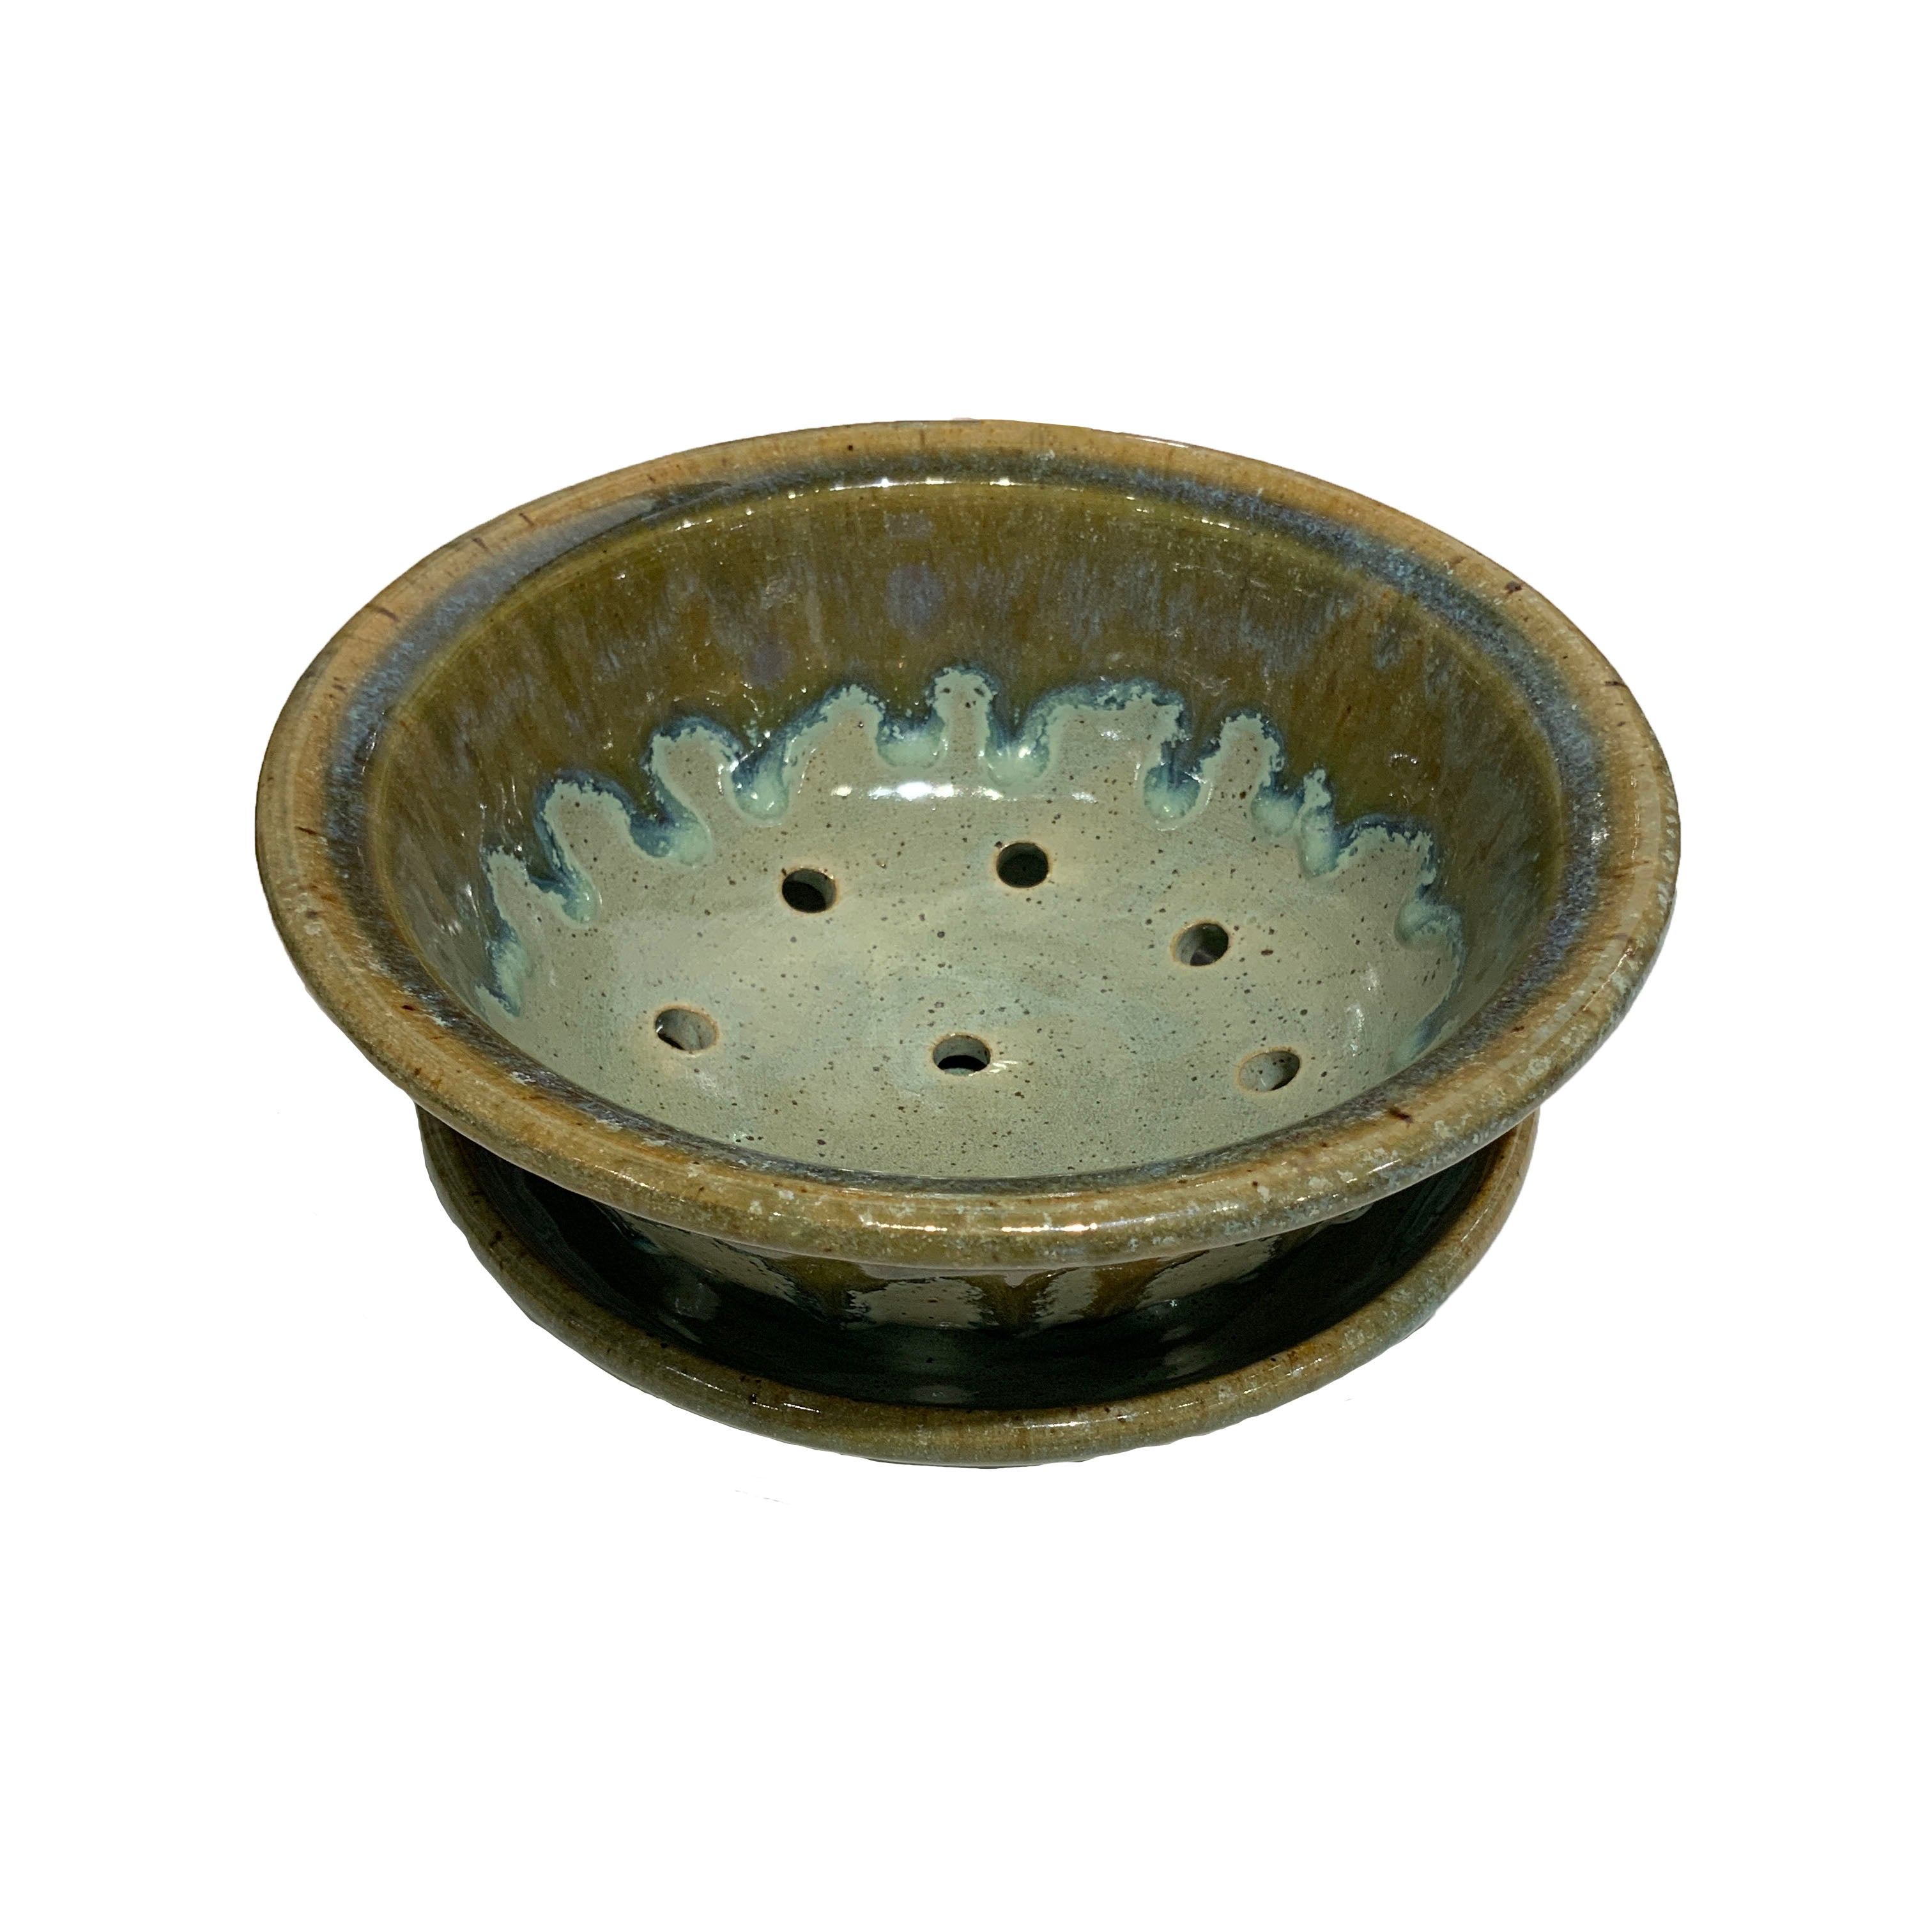 BERRY BOWL - SPECKLED MINT WITH BLUE/GREEN DRIP